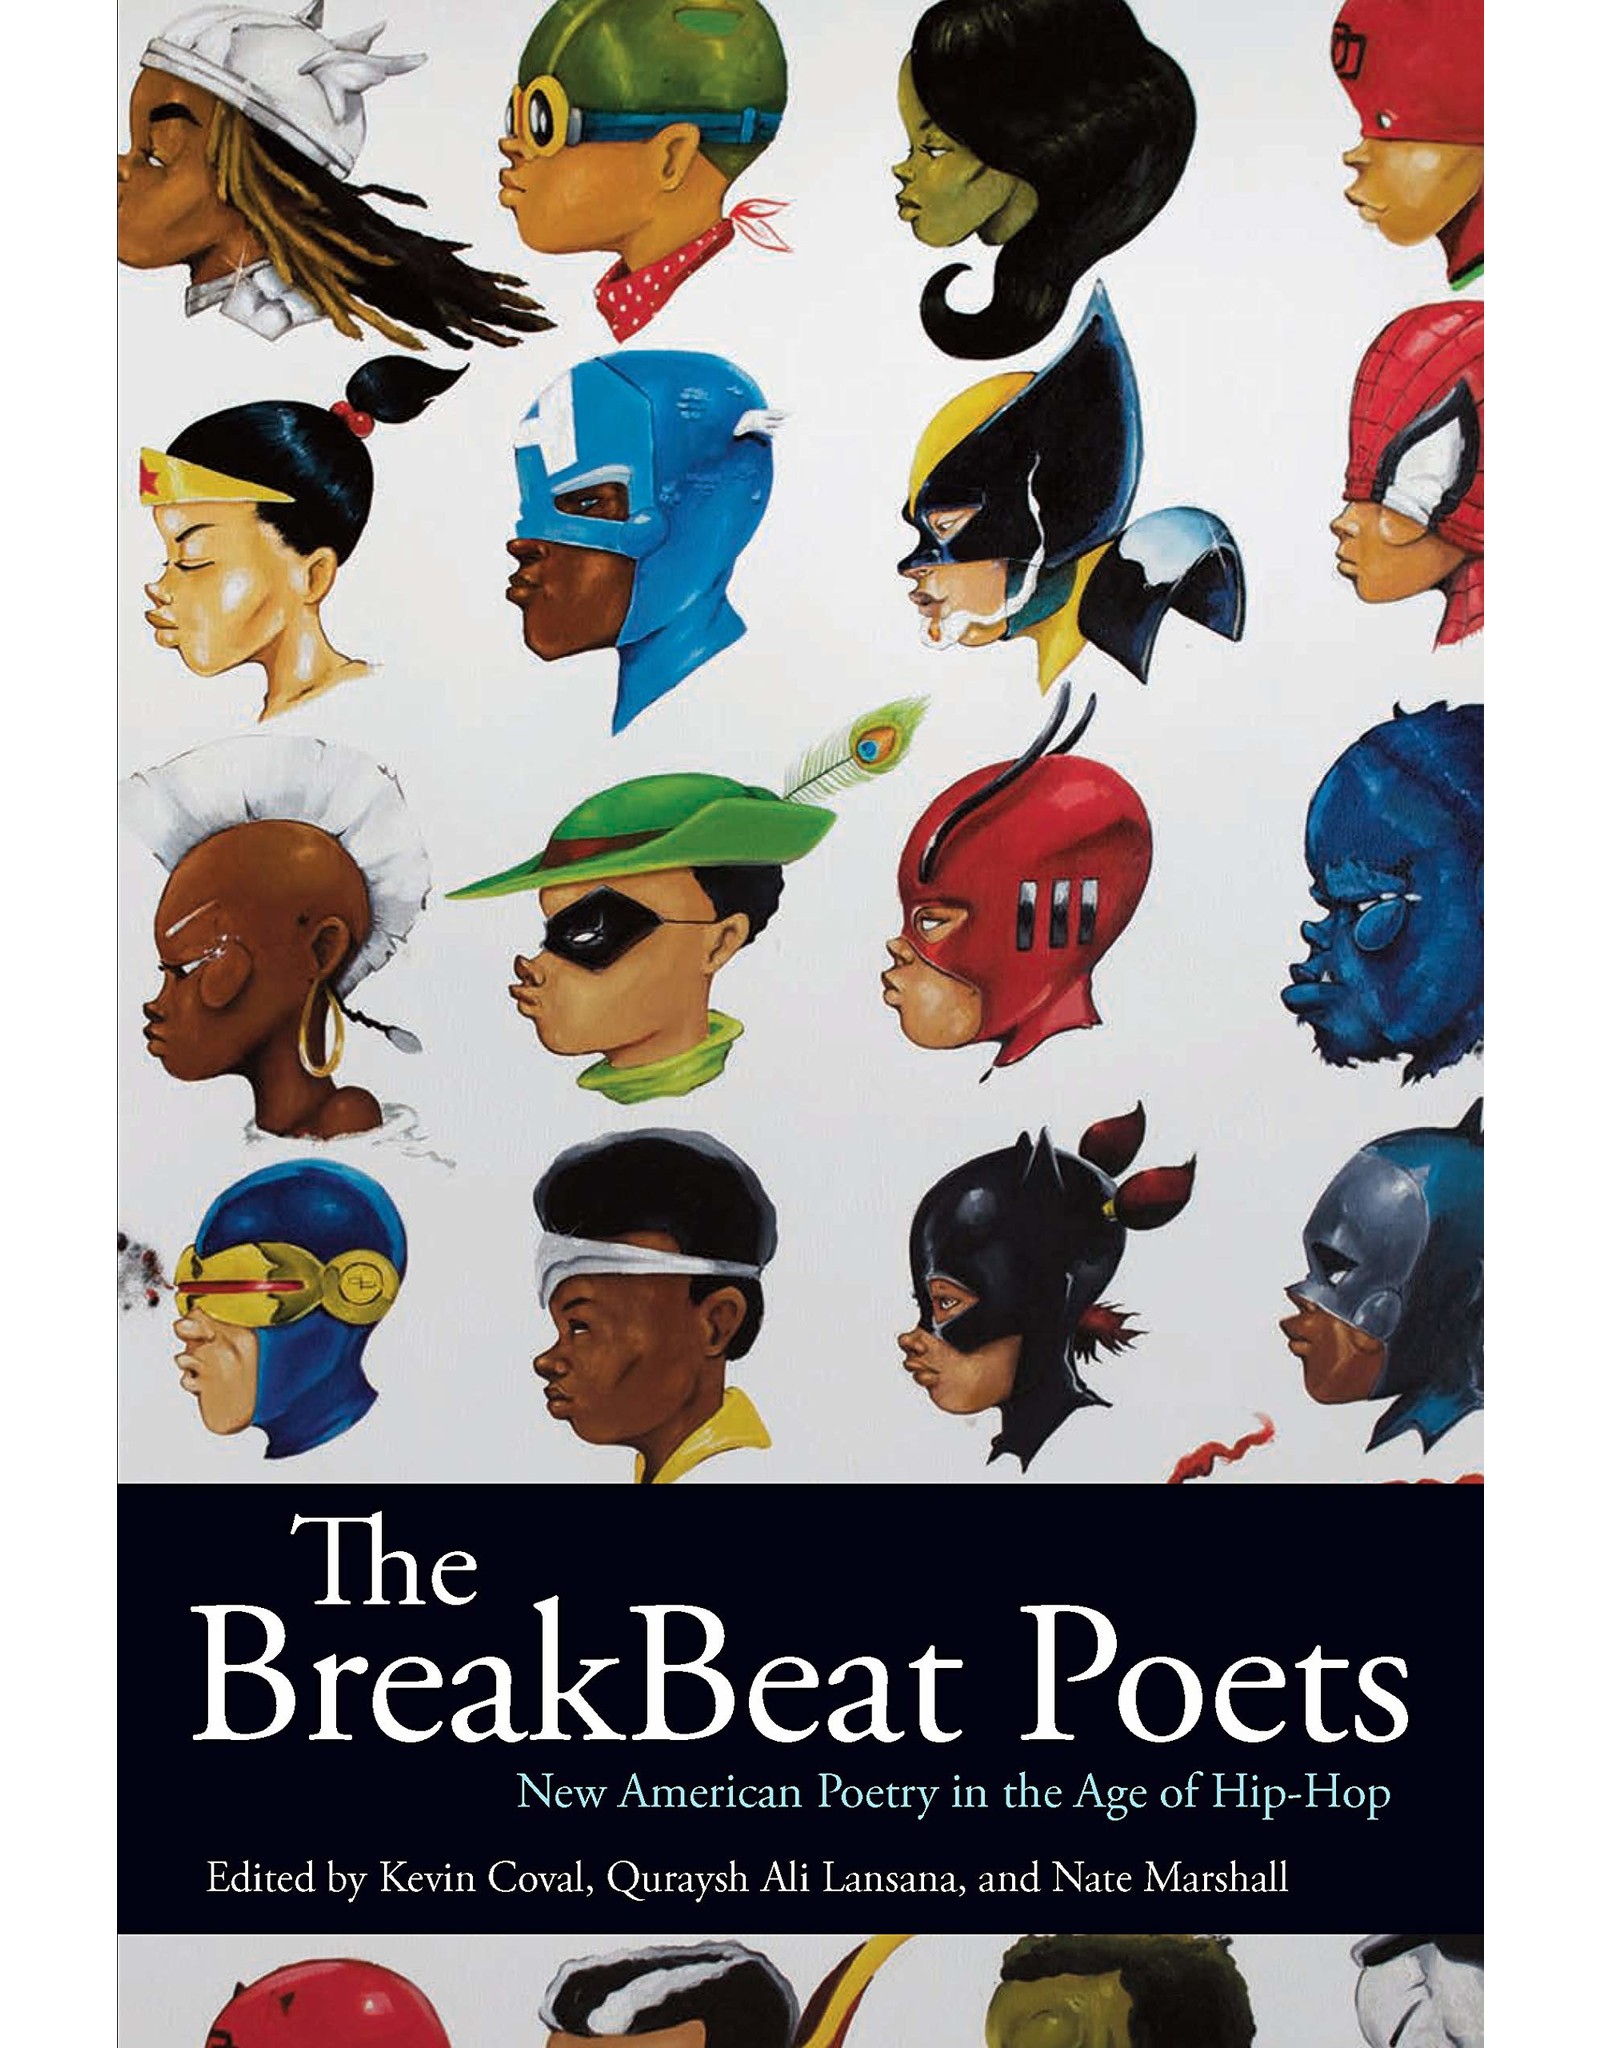 Literature The Breakbeat Poets: New American Poetry in the Age of Hip-Hop